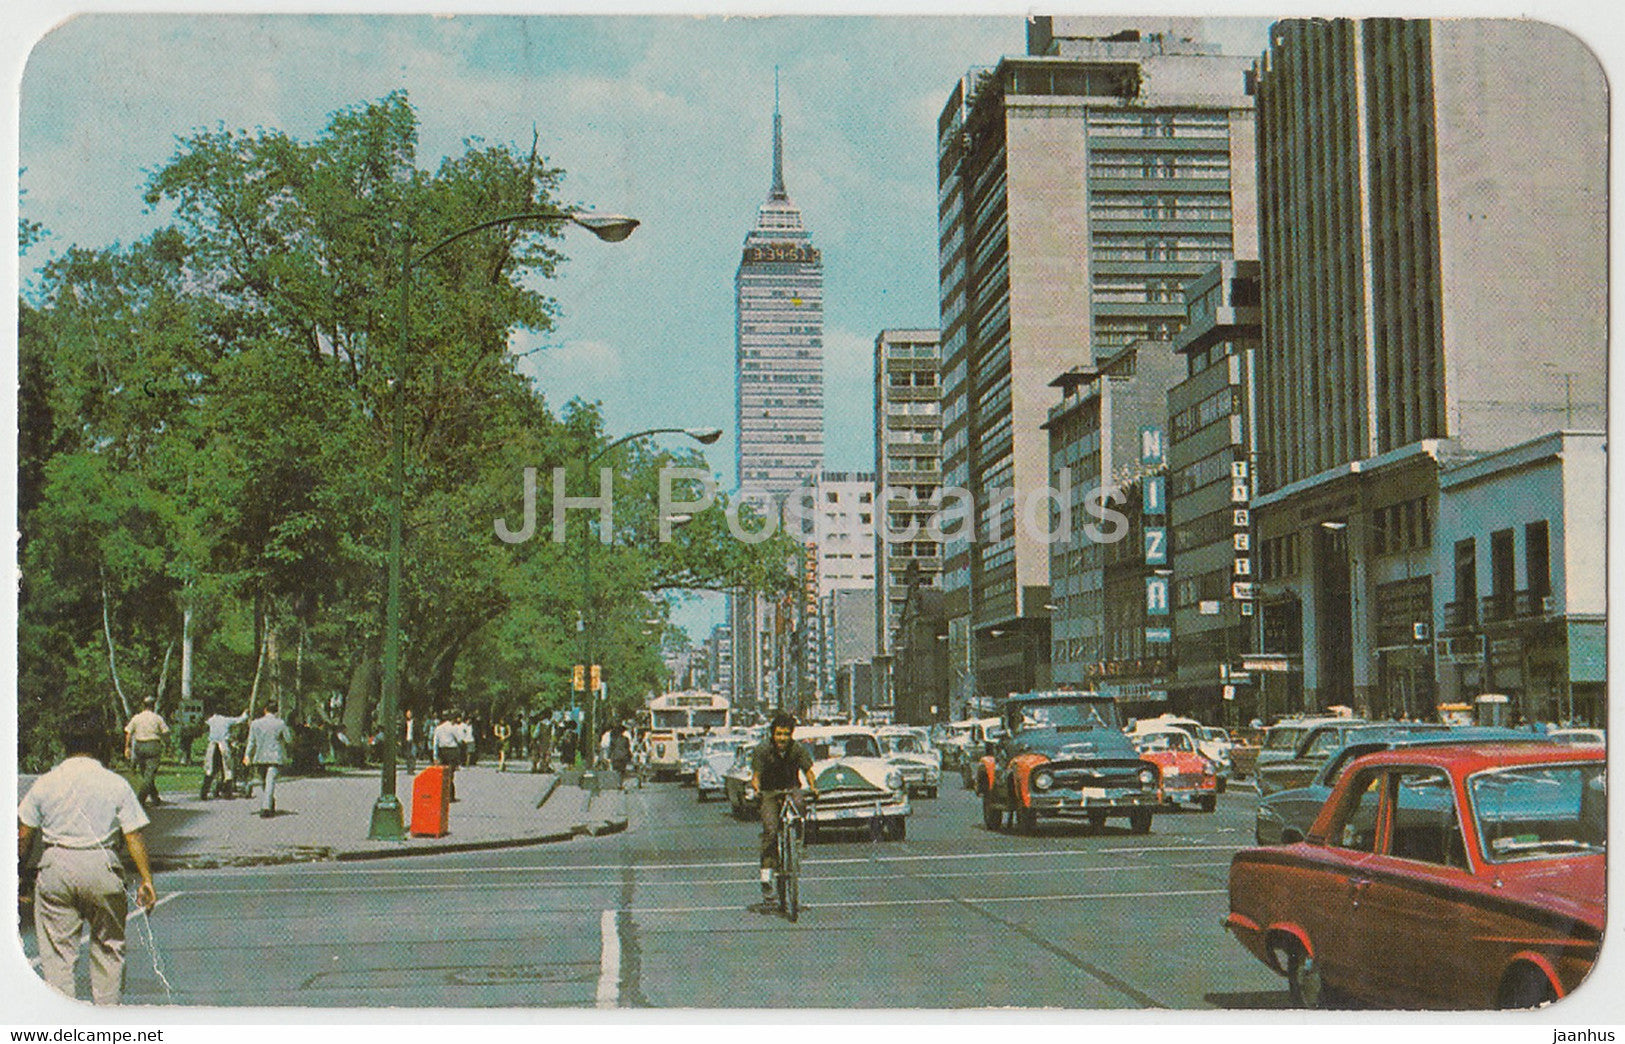 Ave Juares Mexico - The Broadway of Mexico City - car - Mexico - used - JH Postcards